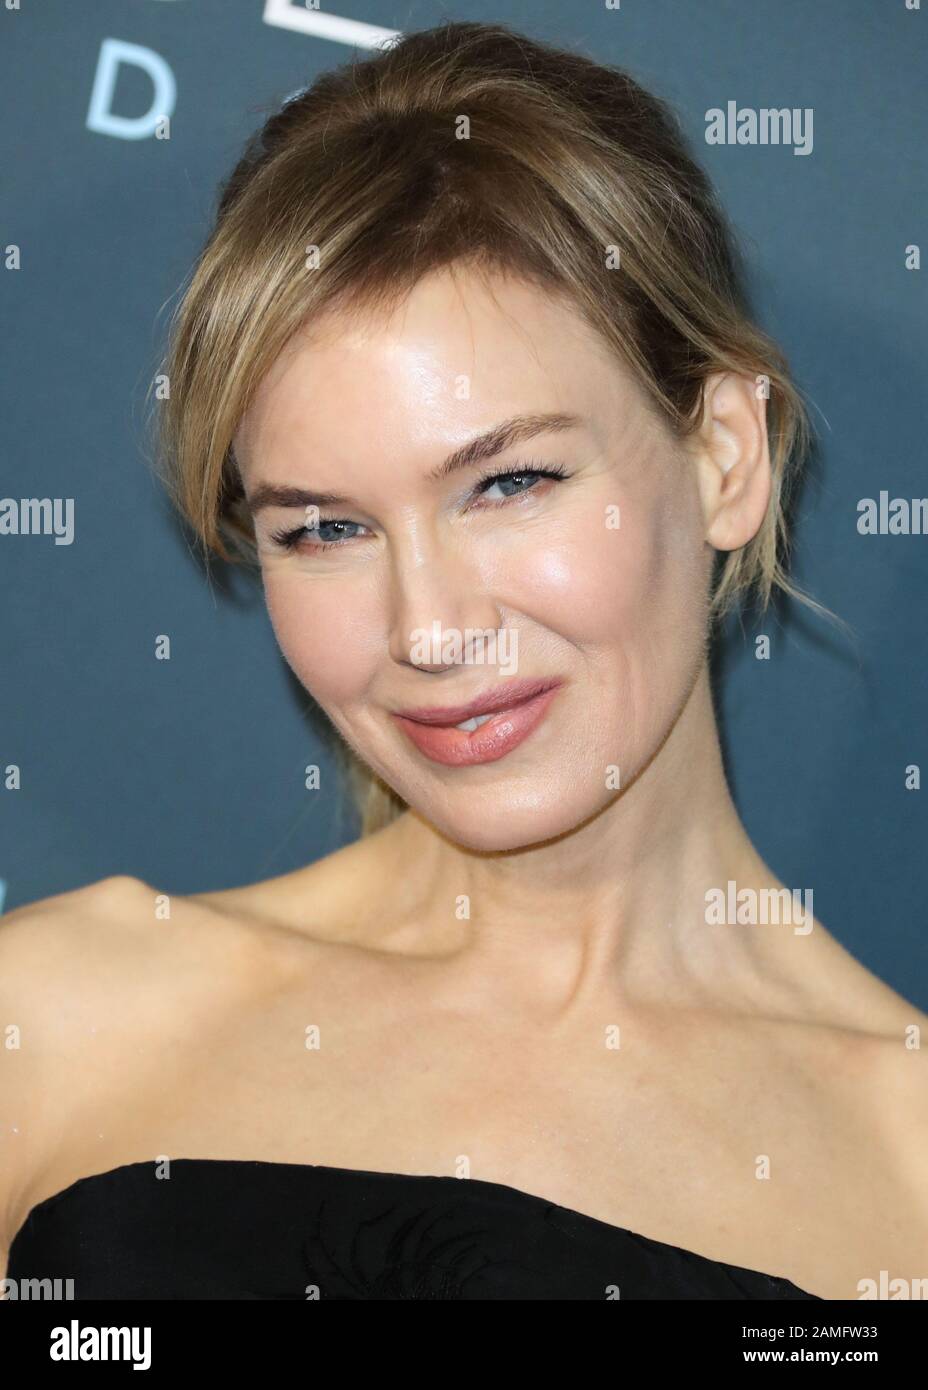 SANTA MONICA, LOS ANGELES, CALIFORNIA, USA - JANUARY 12: Actress Renee Zellweger wearing a Dior Haute Couture dress, David Webb jewelry, and Jimmy Choo shoes arrives at the 25th Annual Critics' Choice Awards held at the Barker Hangar on January 12, 2020 in Santa Monica, Los Angeles, California, United States. (Photo by Xavier Collin/Image Press Agency) Stock Photo